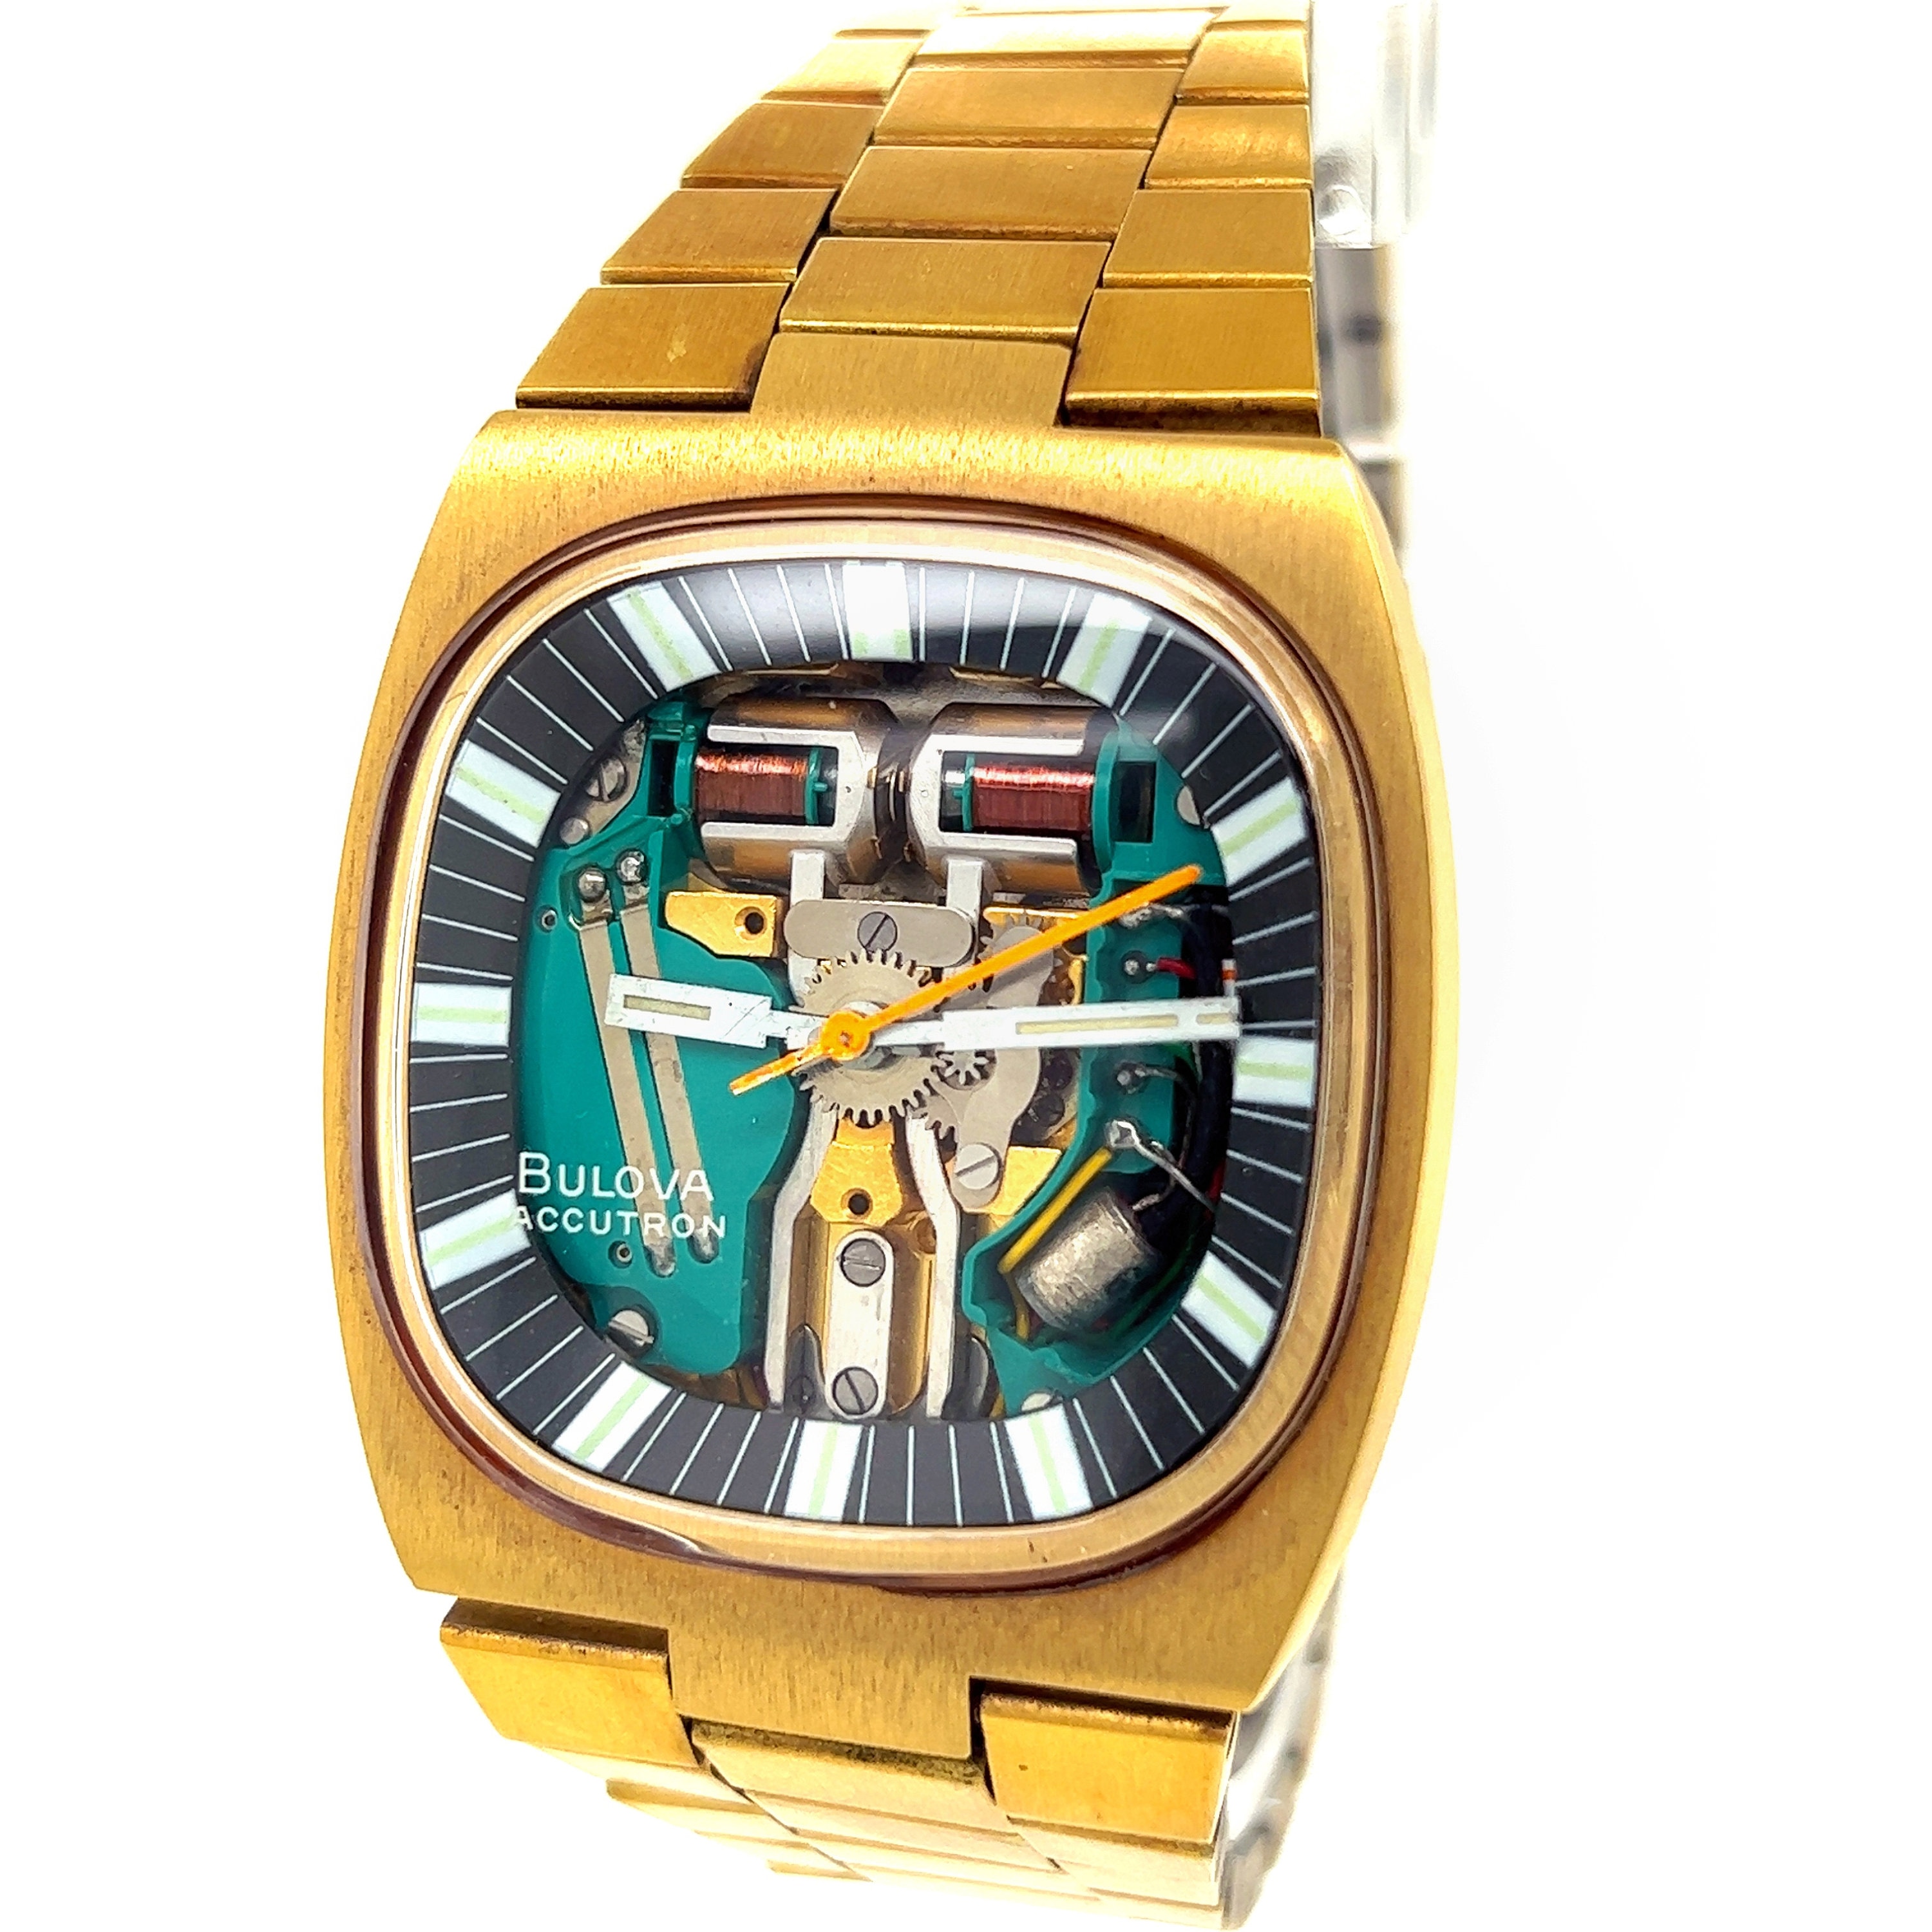 1970s Gold Filled and Stainless Steel Back Bulova Accutron Wrist